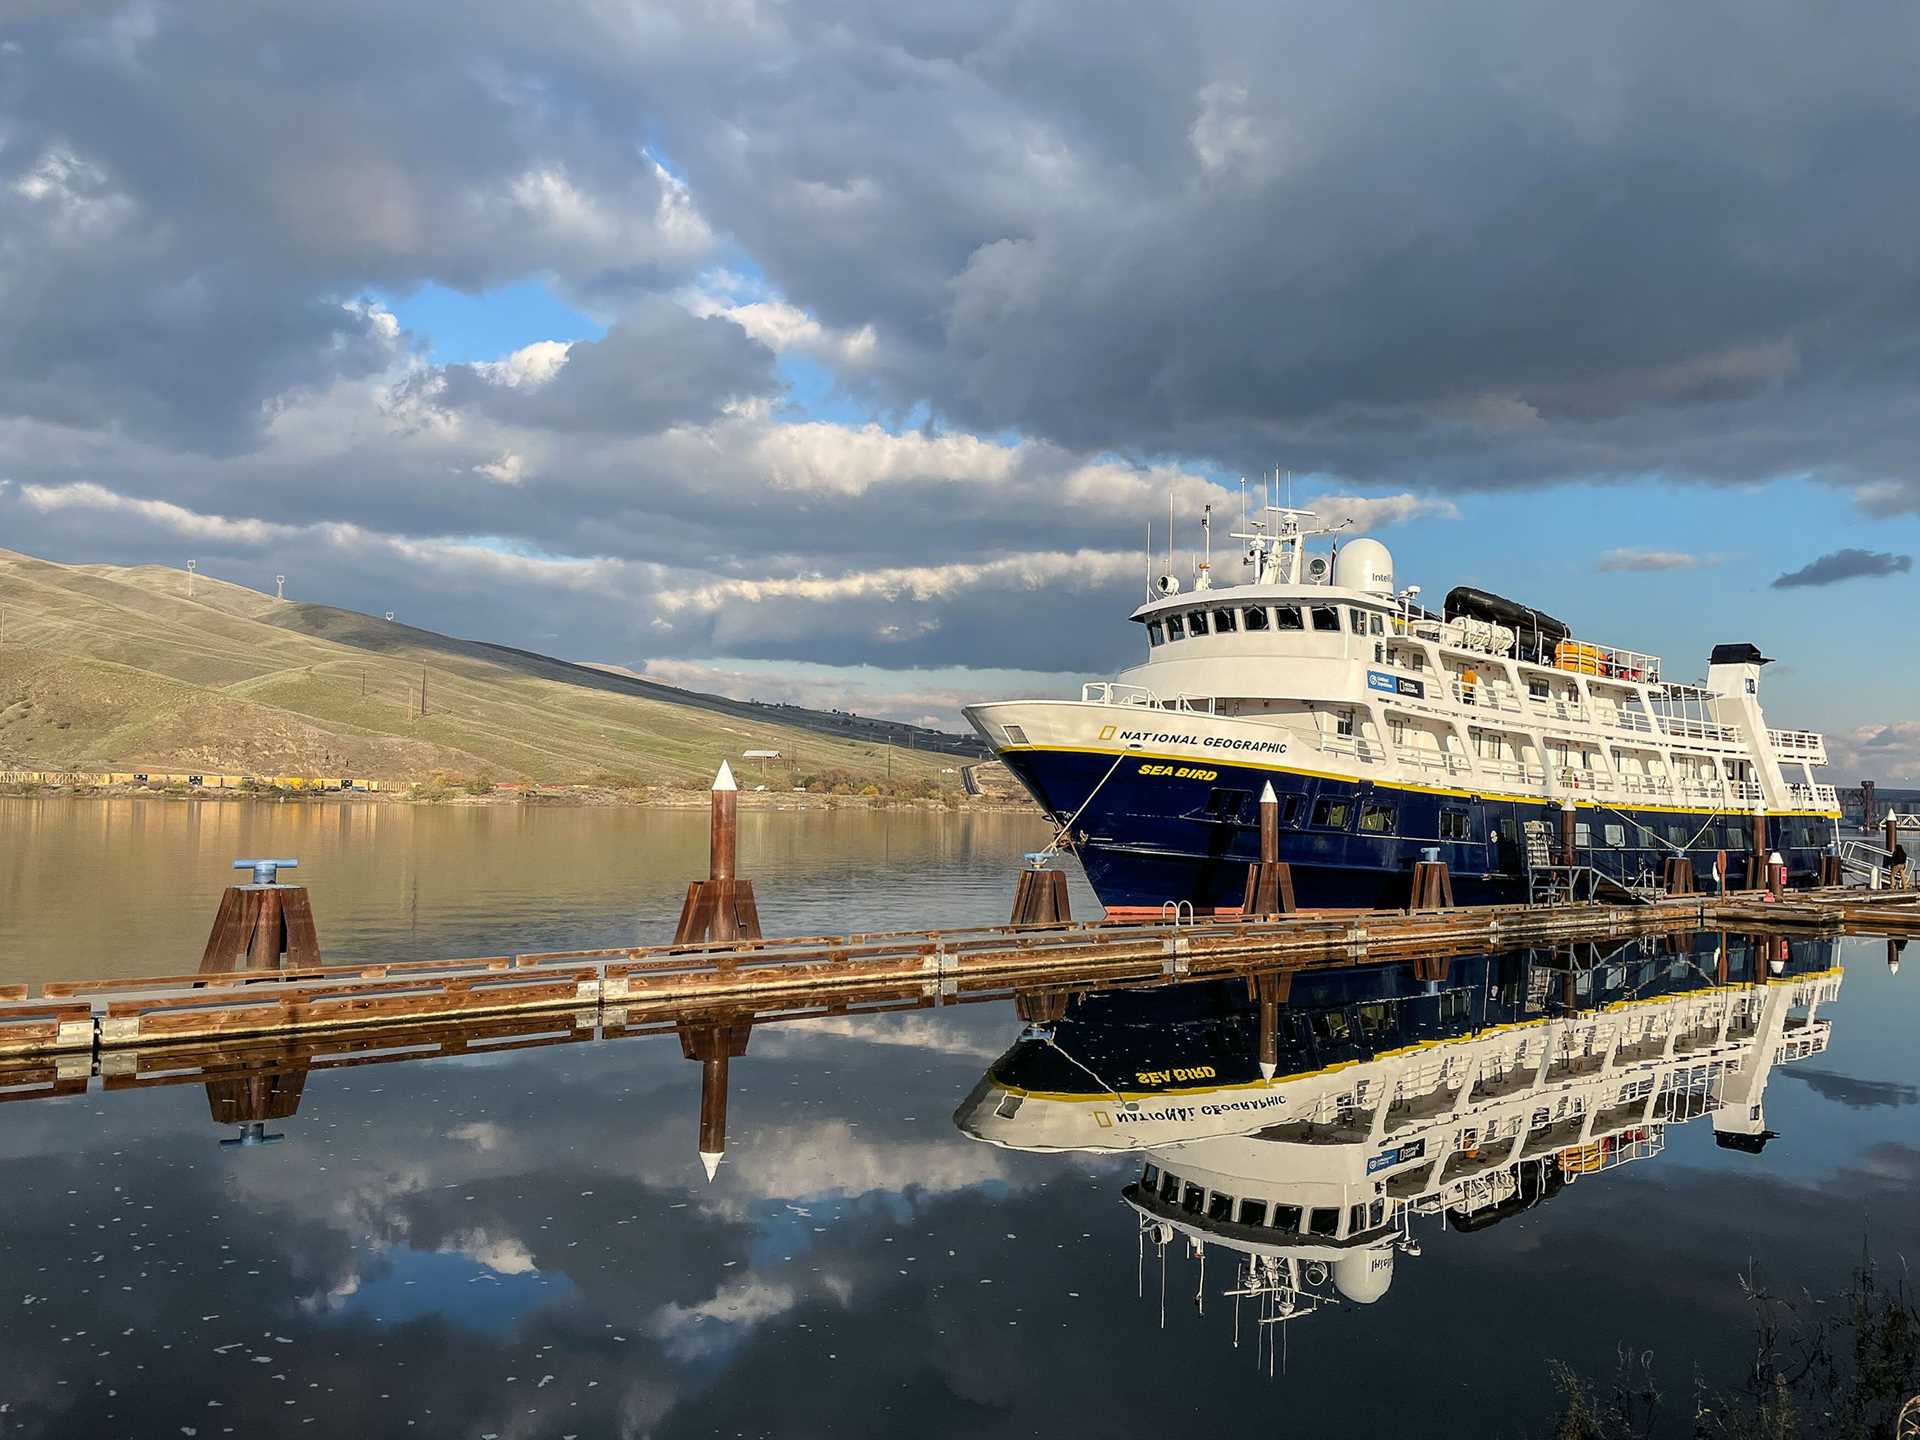 National Geographic Sea Bird ship docked on the Columbia River